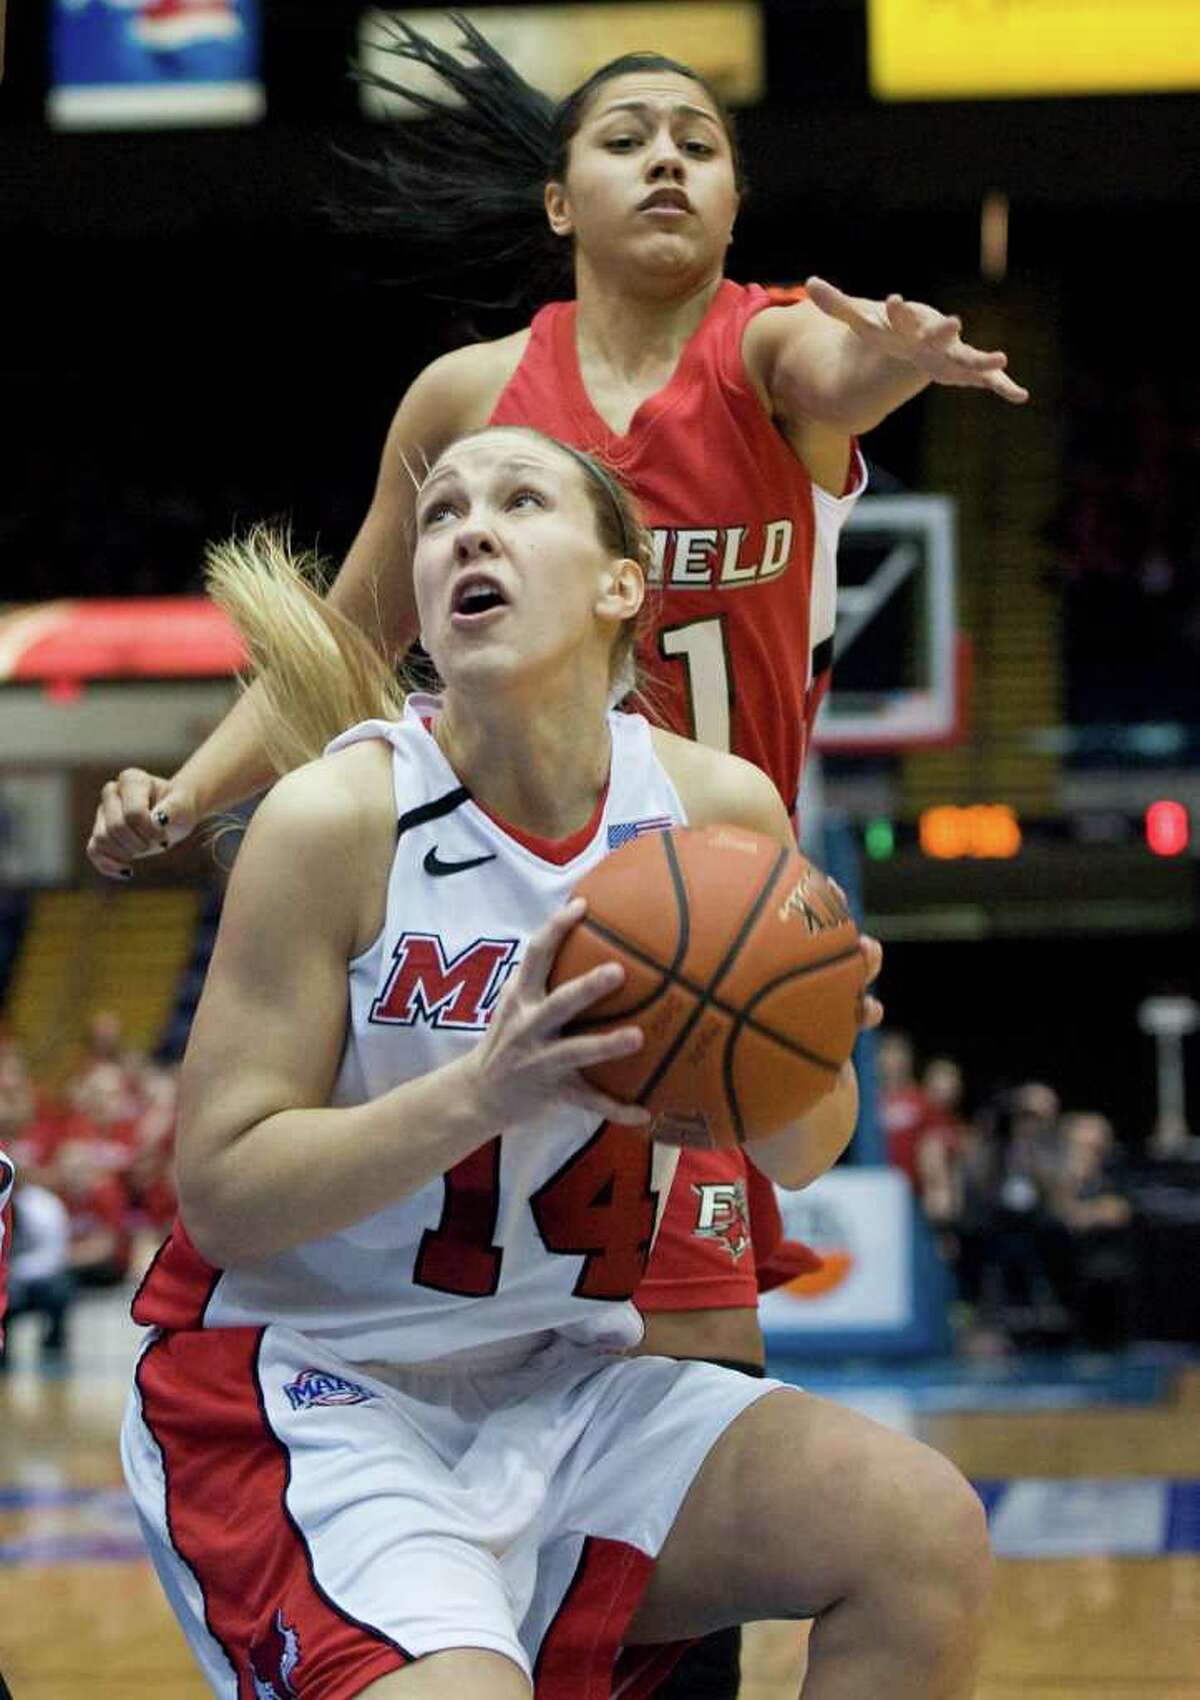 Marist's Casey Dulin, bottom, is guarded by Fairfield's Desiree Pina, top in the first half of an NCAA college basketball game for the championship of the Metro Atlantic Athletic conference women's tournament in Springfield, Mass., Monday, March 5, 2012. (AP Photo/Jessica Hill)